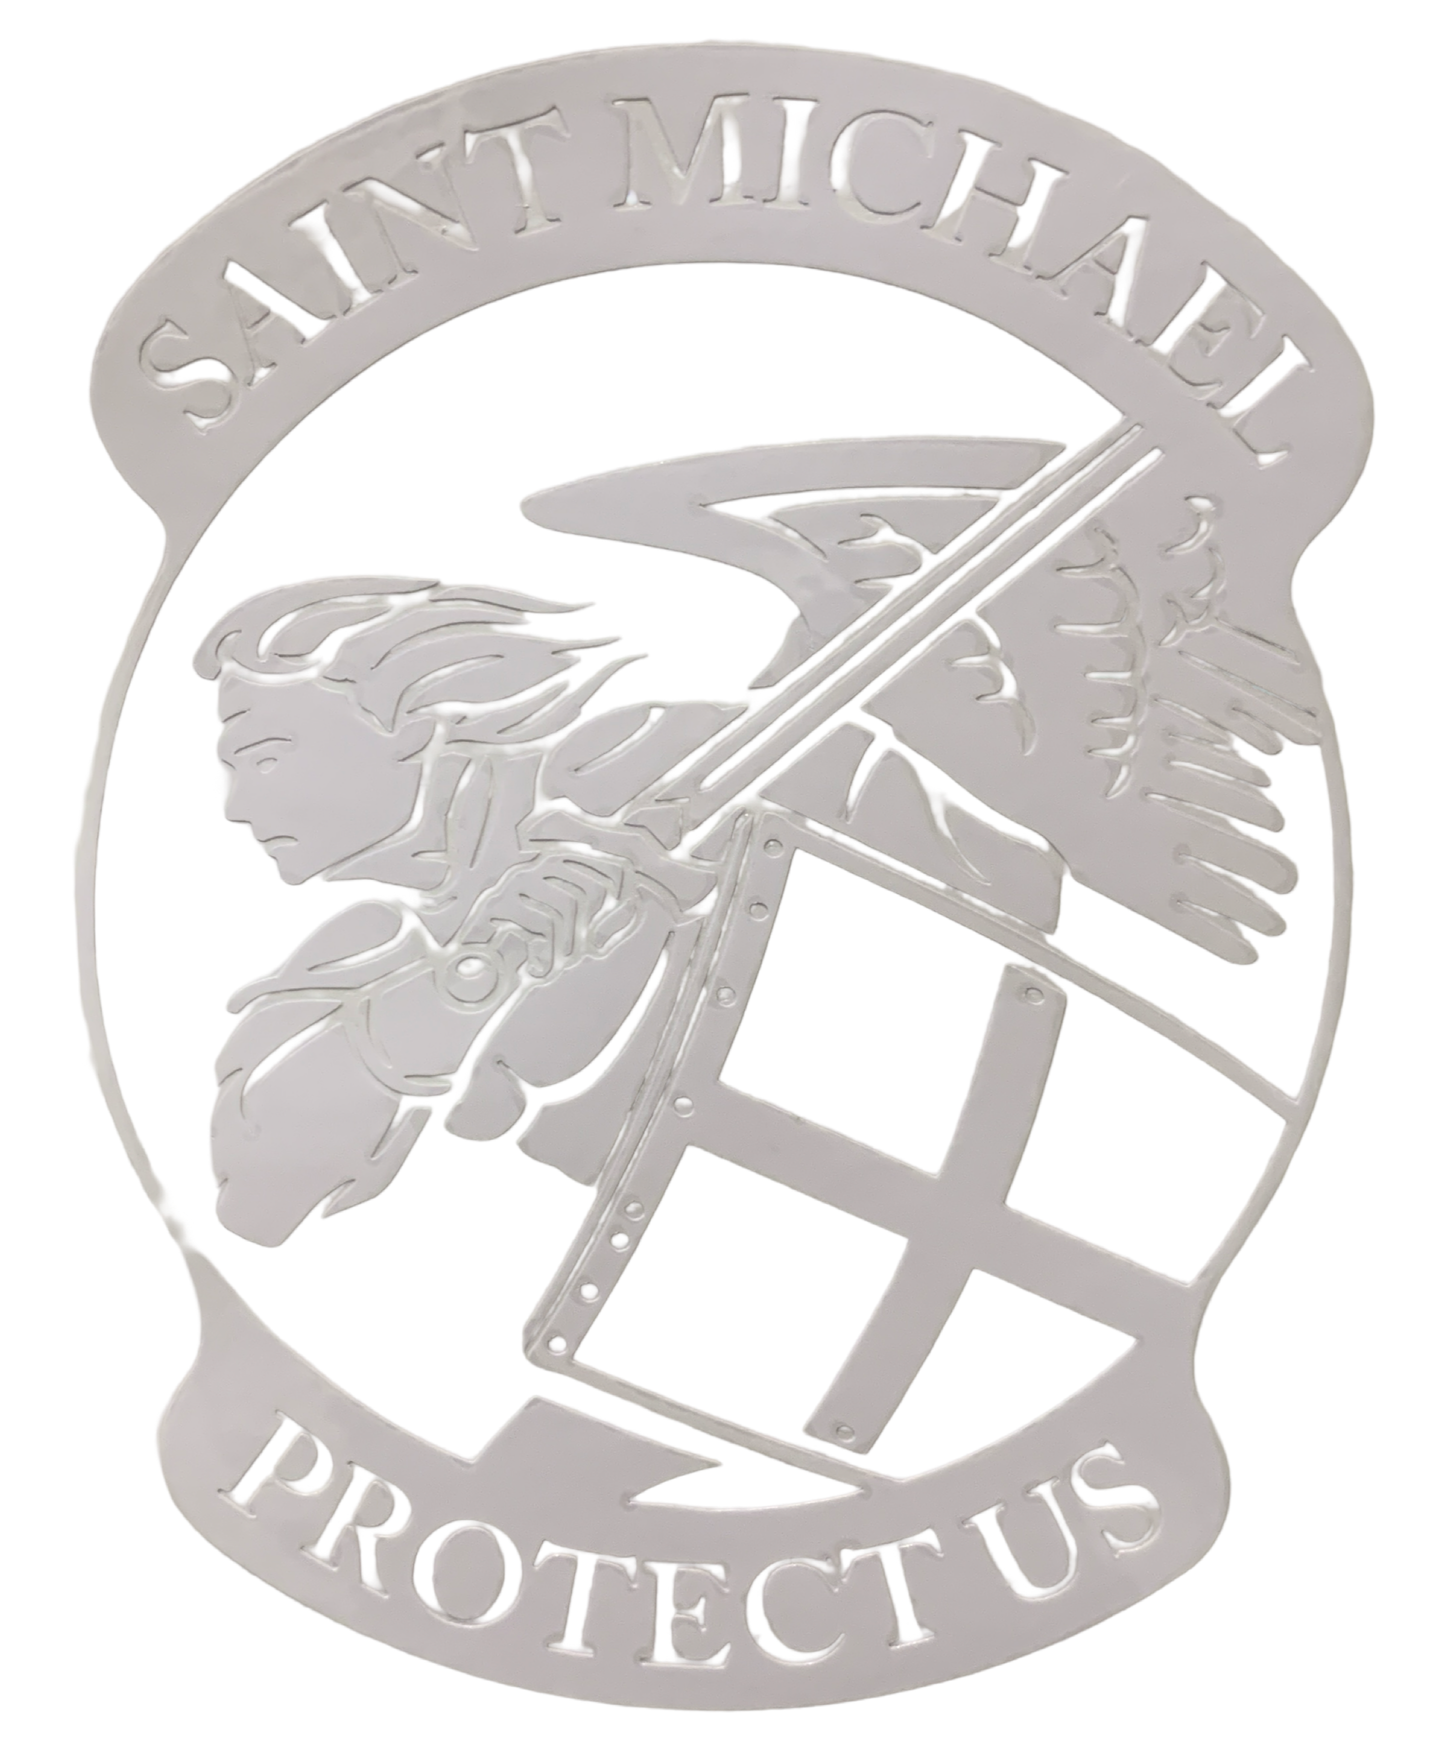 "St. Michael, Protect Us" Car Decal